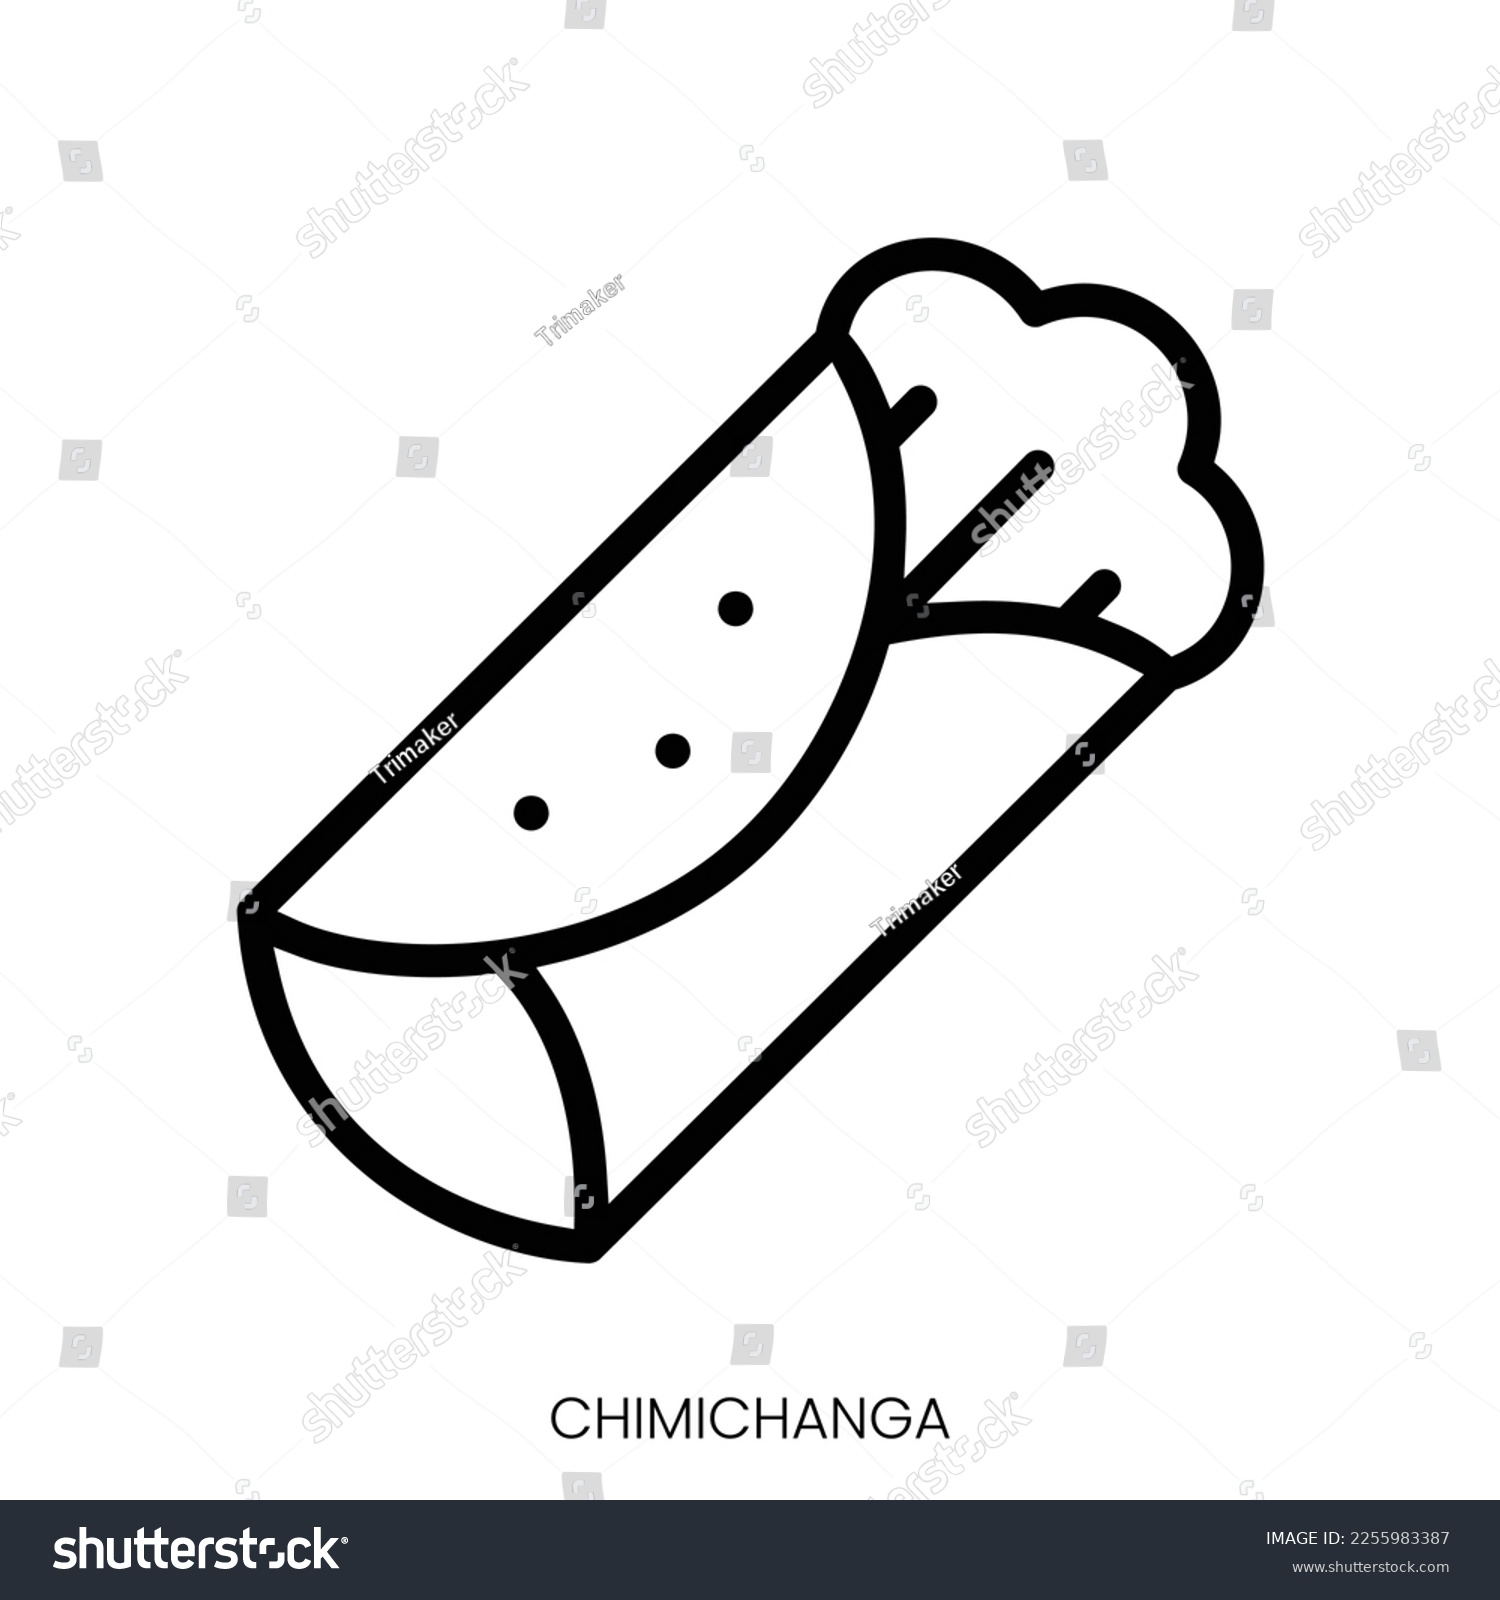 SVG of chimichanga icon. Line Art Style Design Isolated On White Background svg